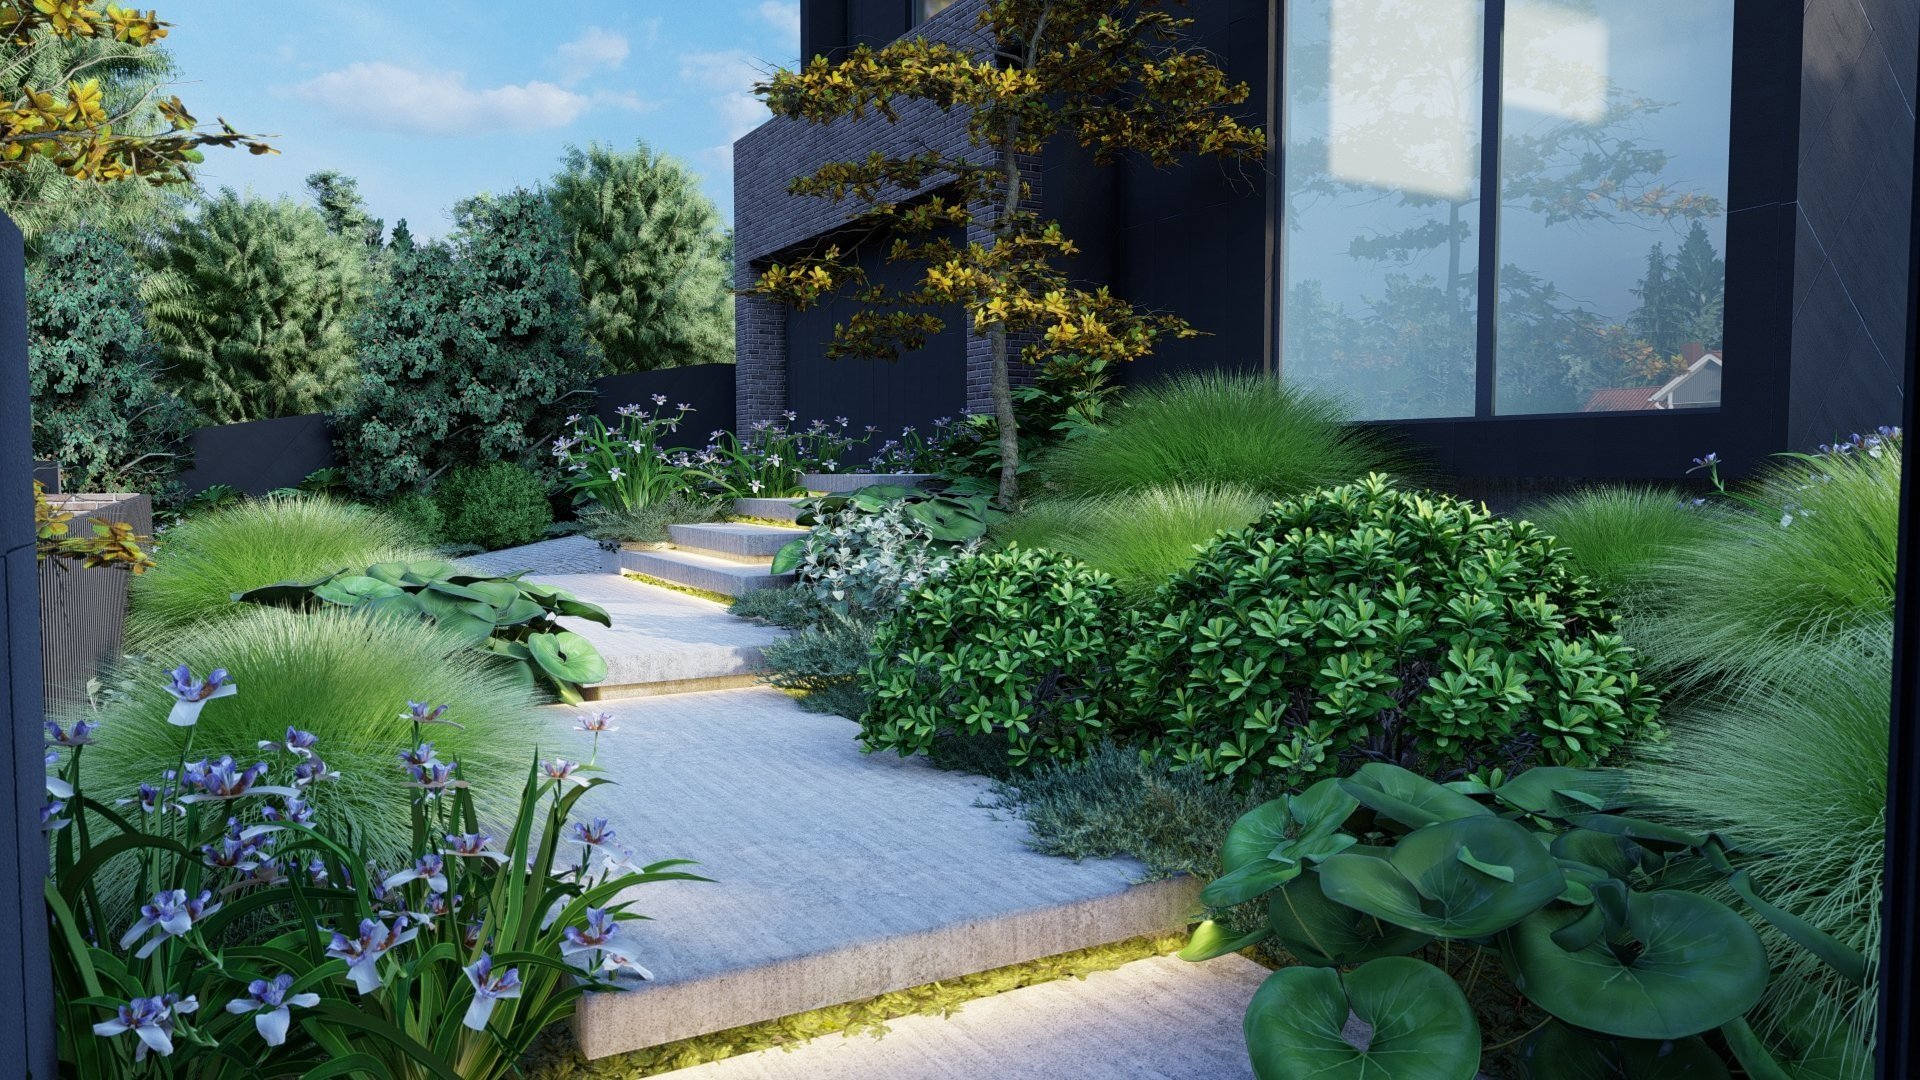  GRDN Newcastle is a bespoke landscape design studio based in Newcastle NSW Australia. Landscape Design - Garden Design - Outdoor living spaces - Gardens - Residential landscaping - Newcastle - Hunter Valley - New South Wales - NSW - Australia  